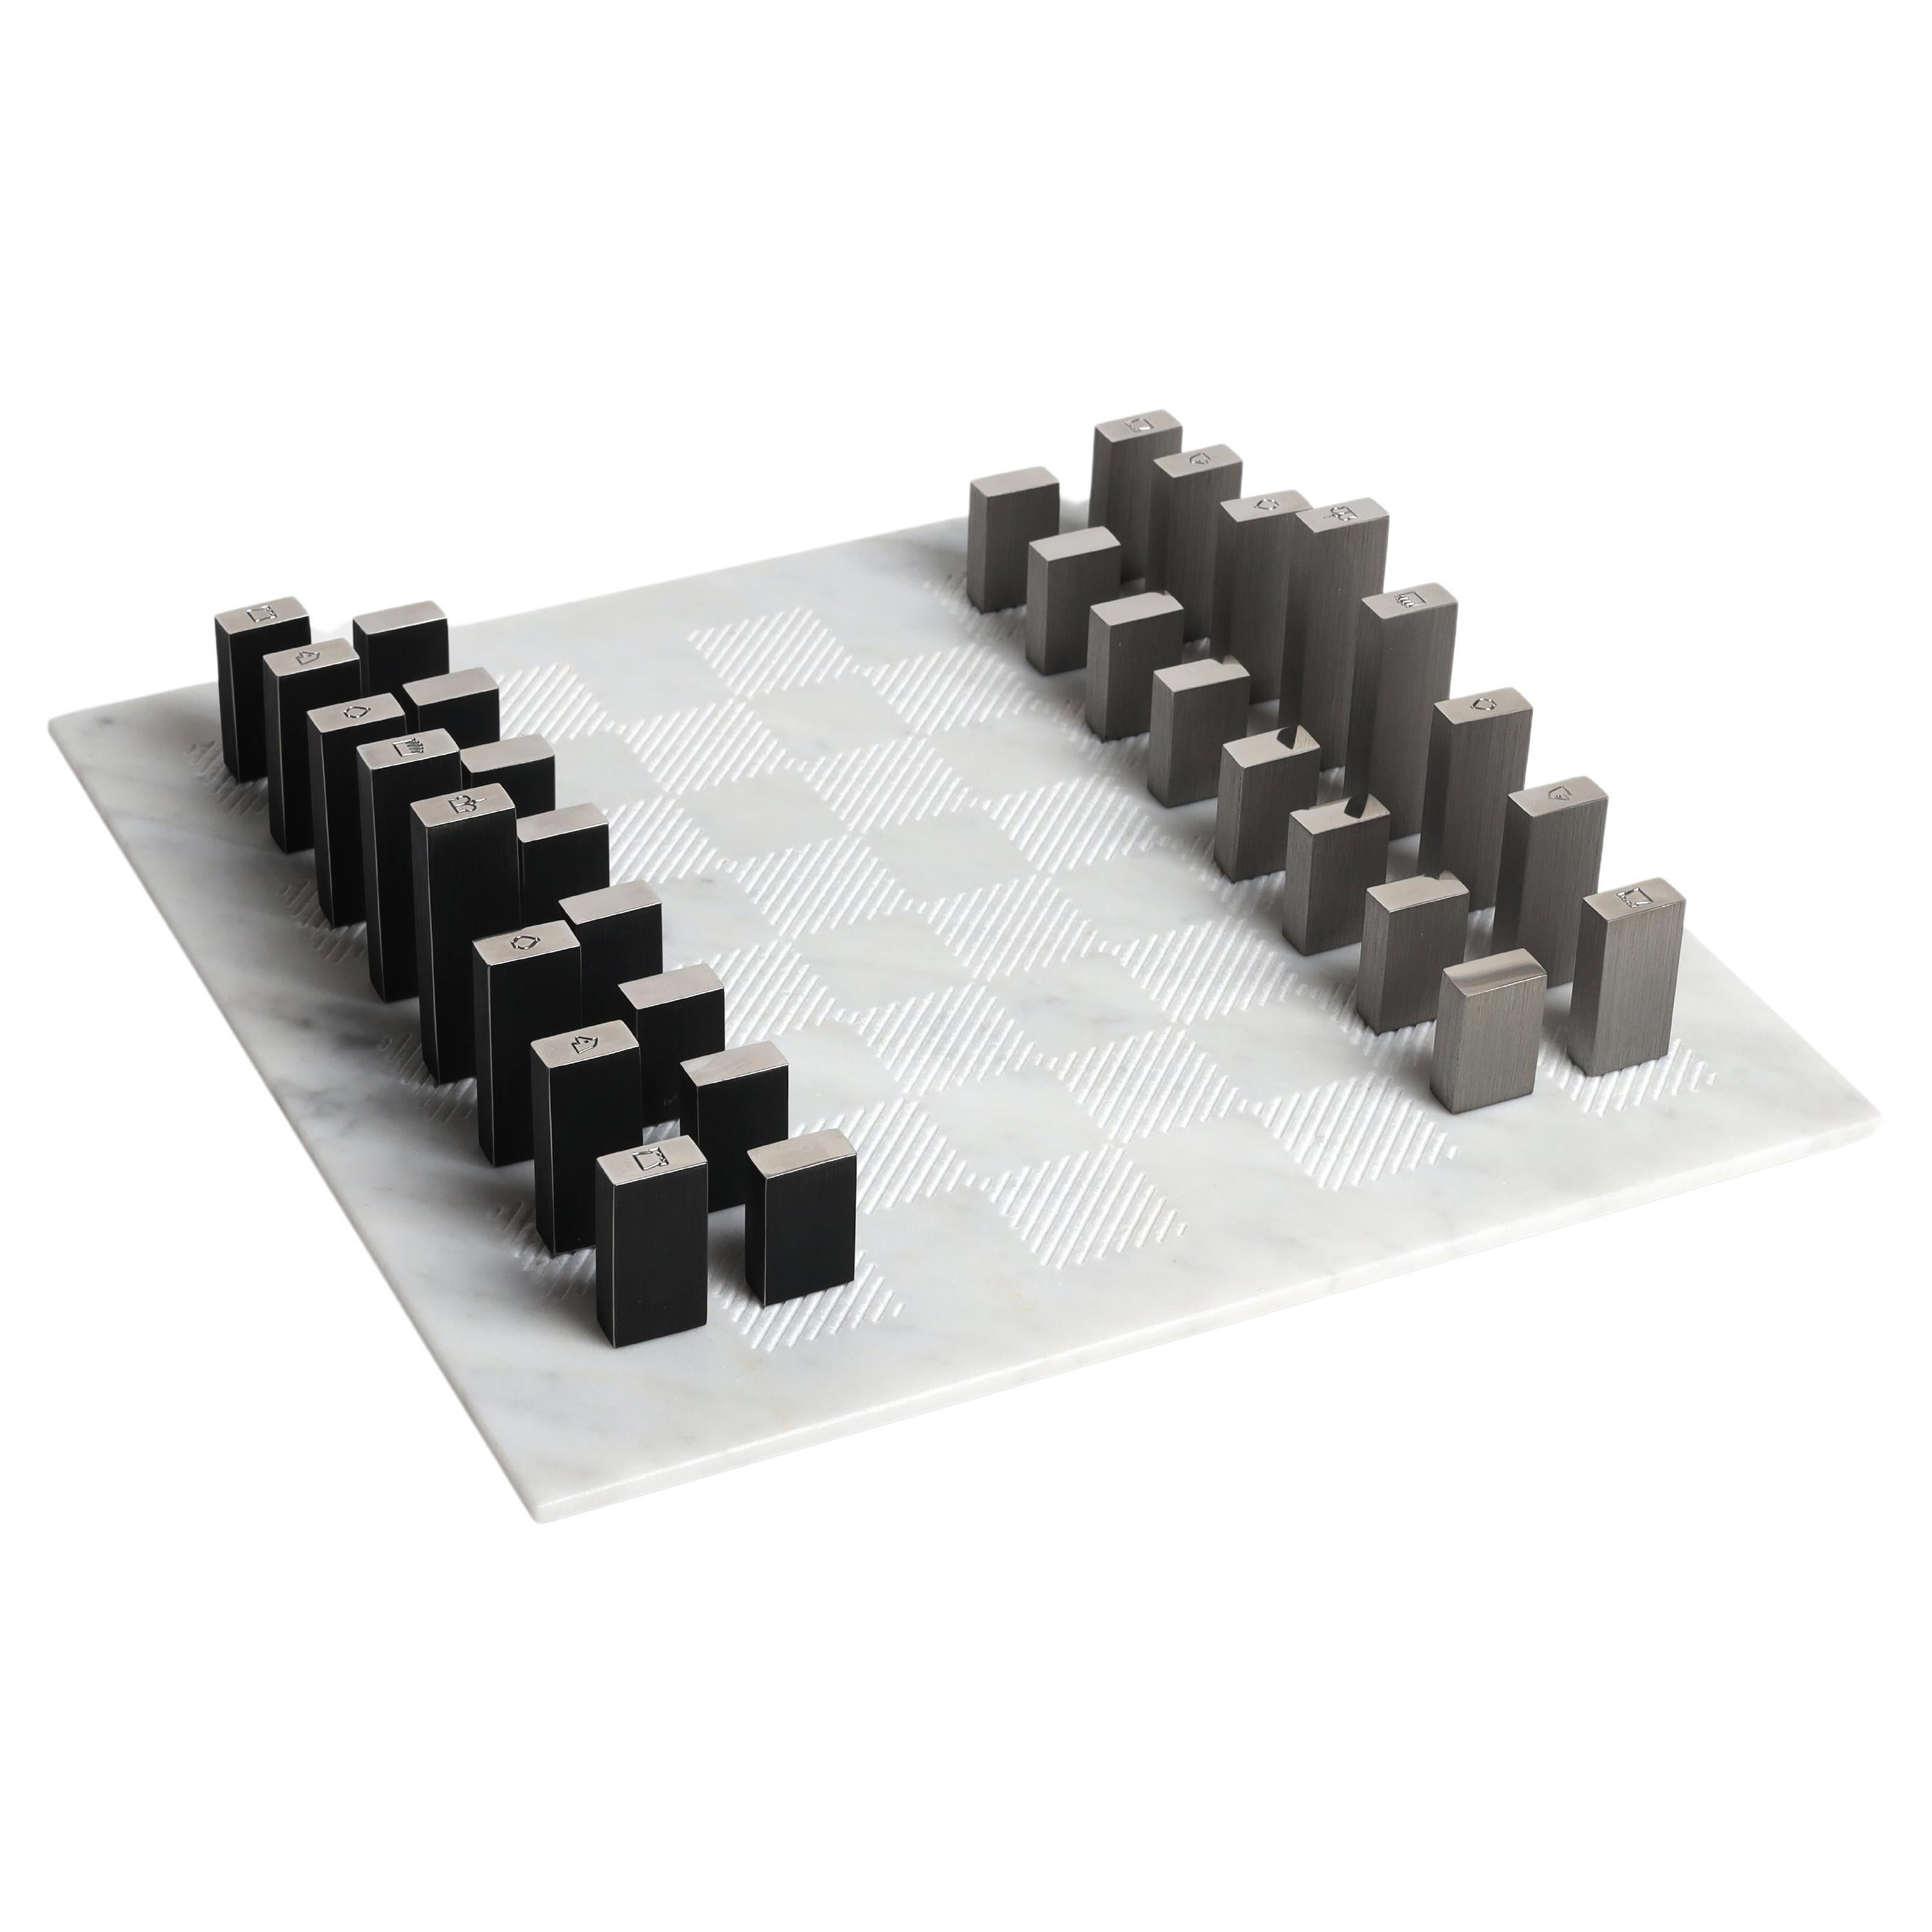 Chessboard For Sale